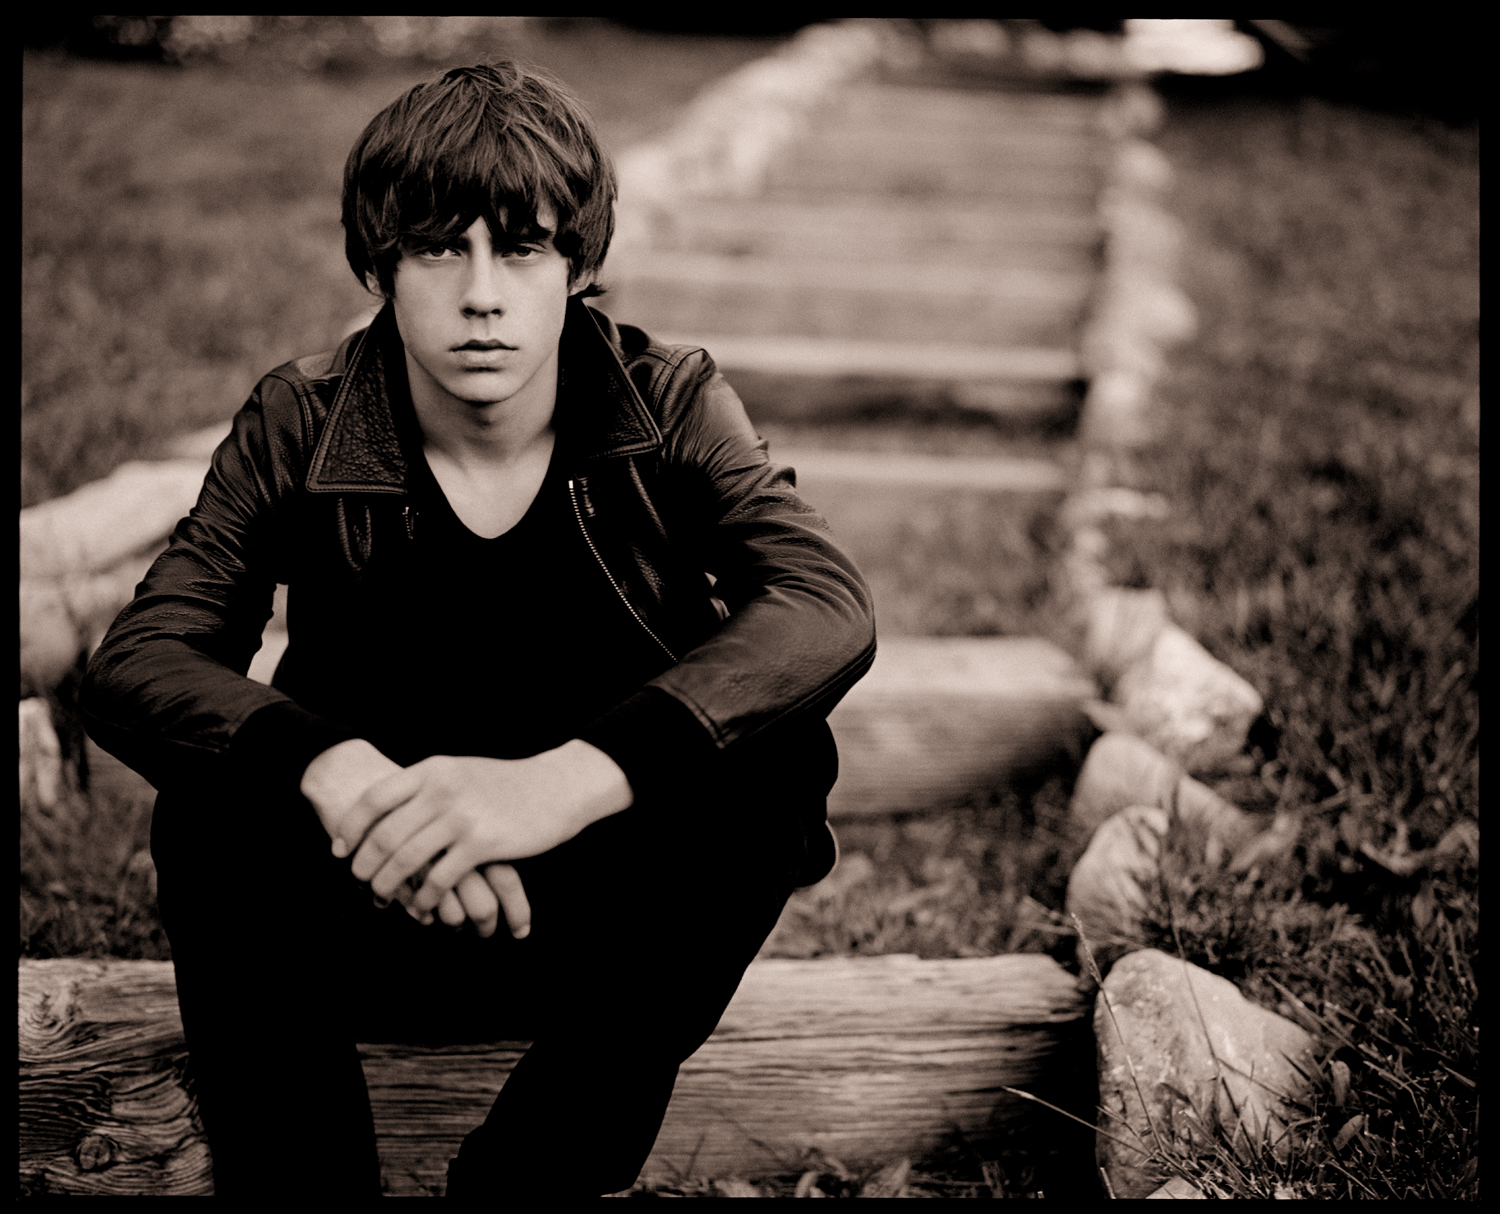 Jake Bugg arrives at the Wolverhampton Civic Hall this year.